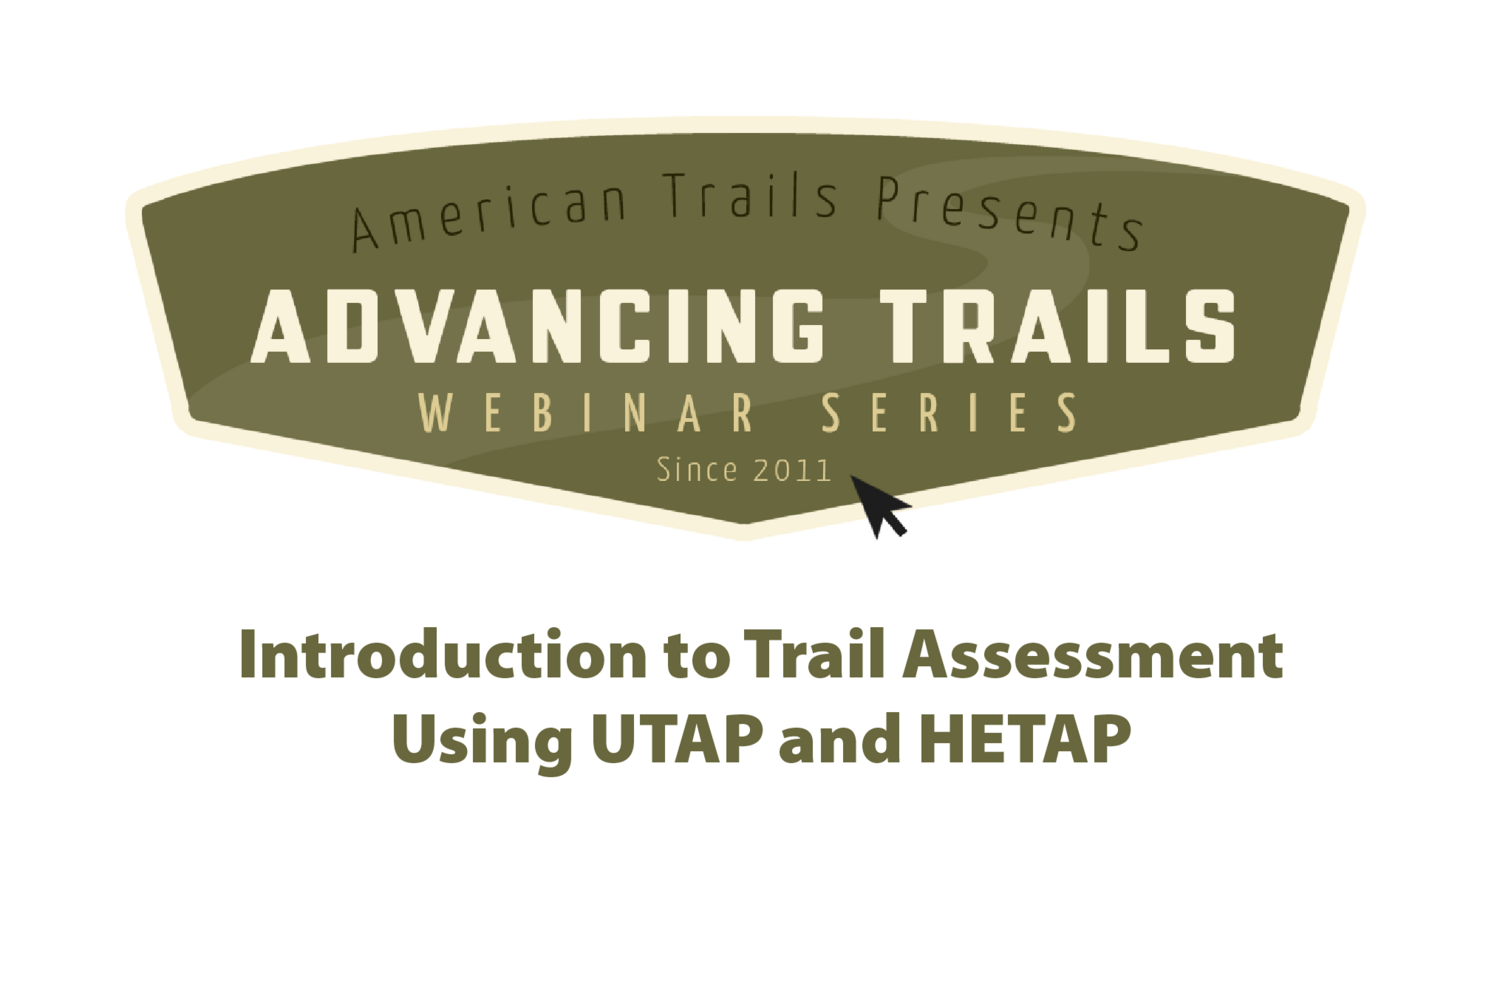 Introduction to Trail Assessment Using UTAP and HETAP (RECORDING)